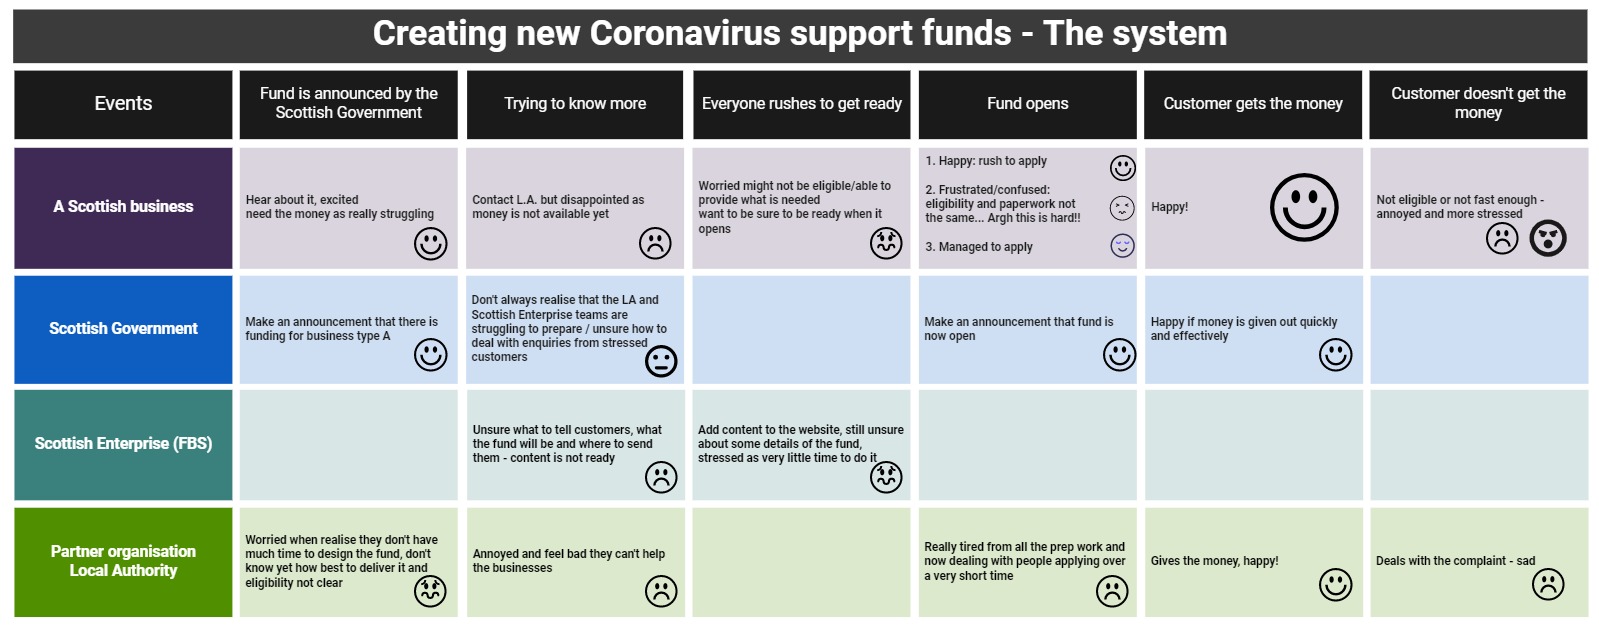 table showing the emotion for all the actors across the creation of a new covid support fund